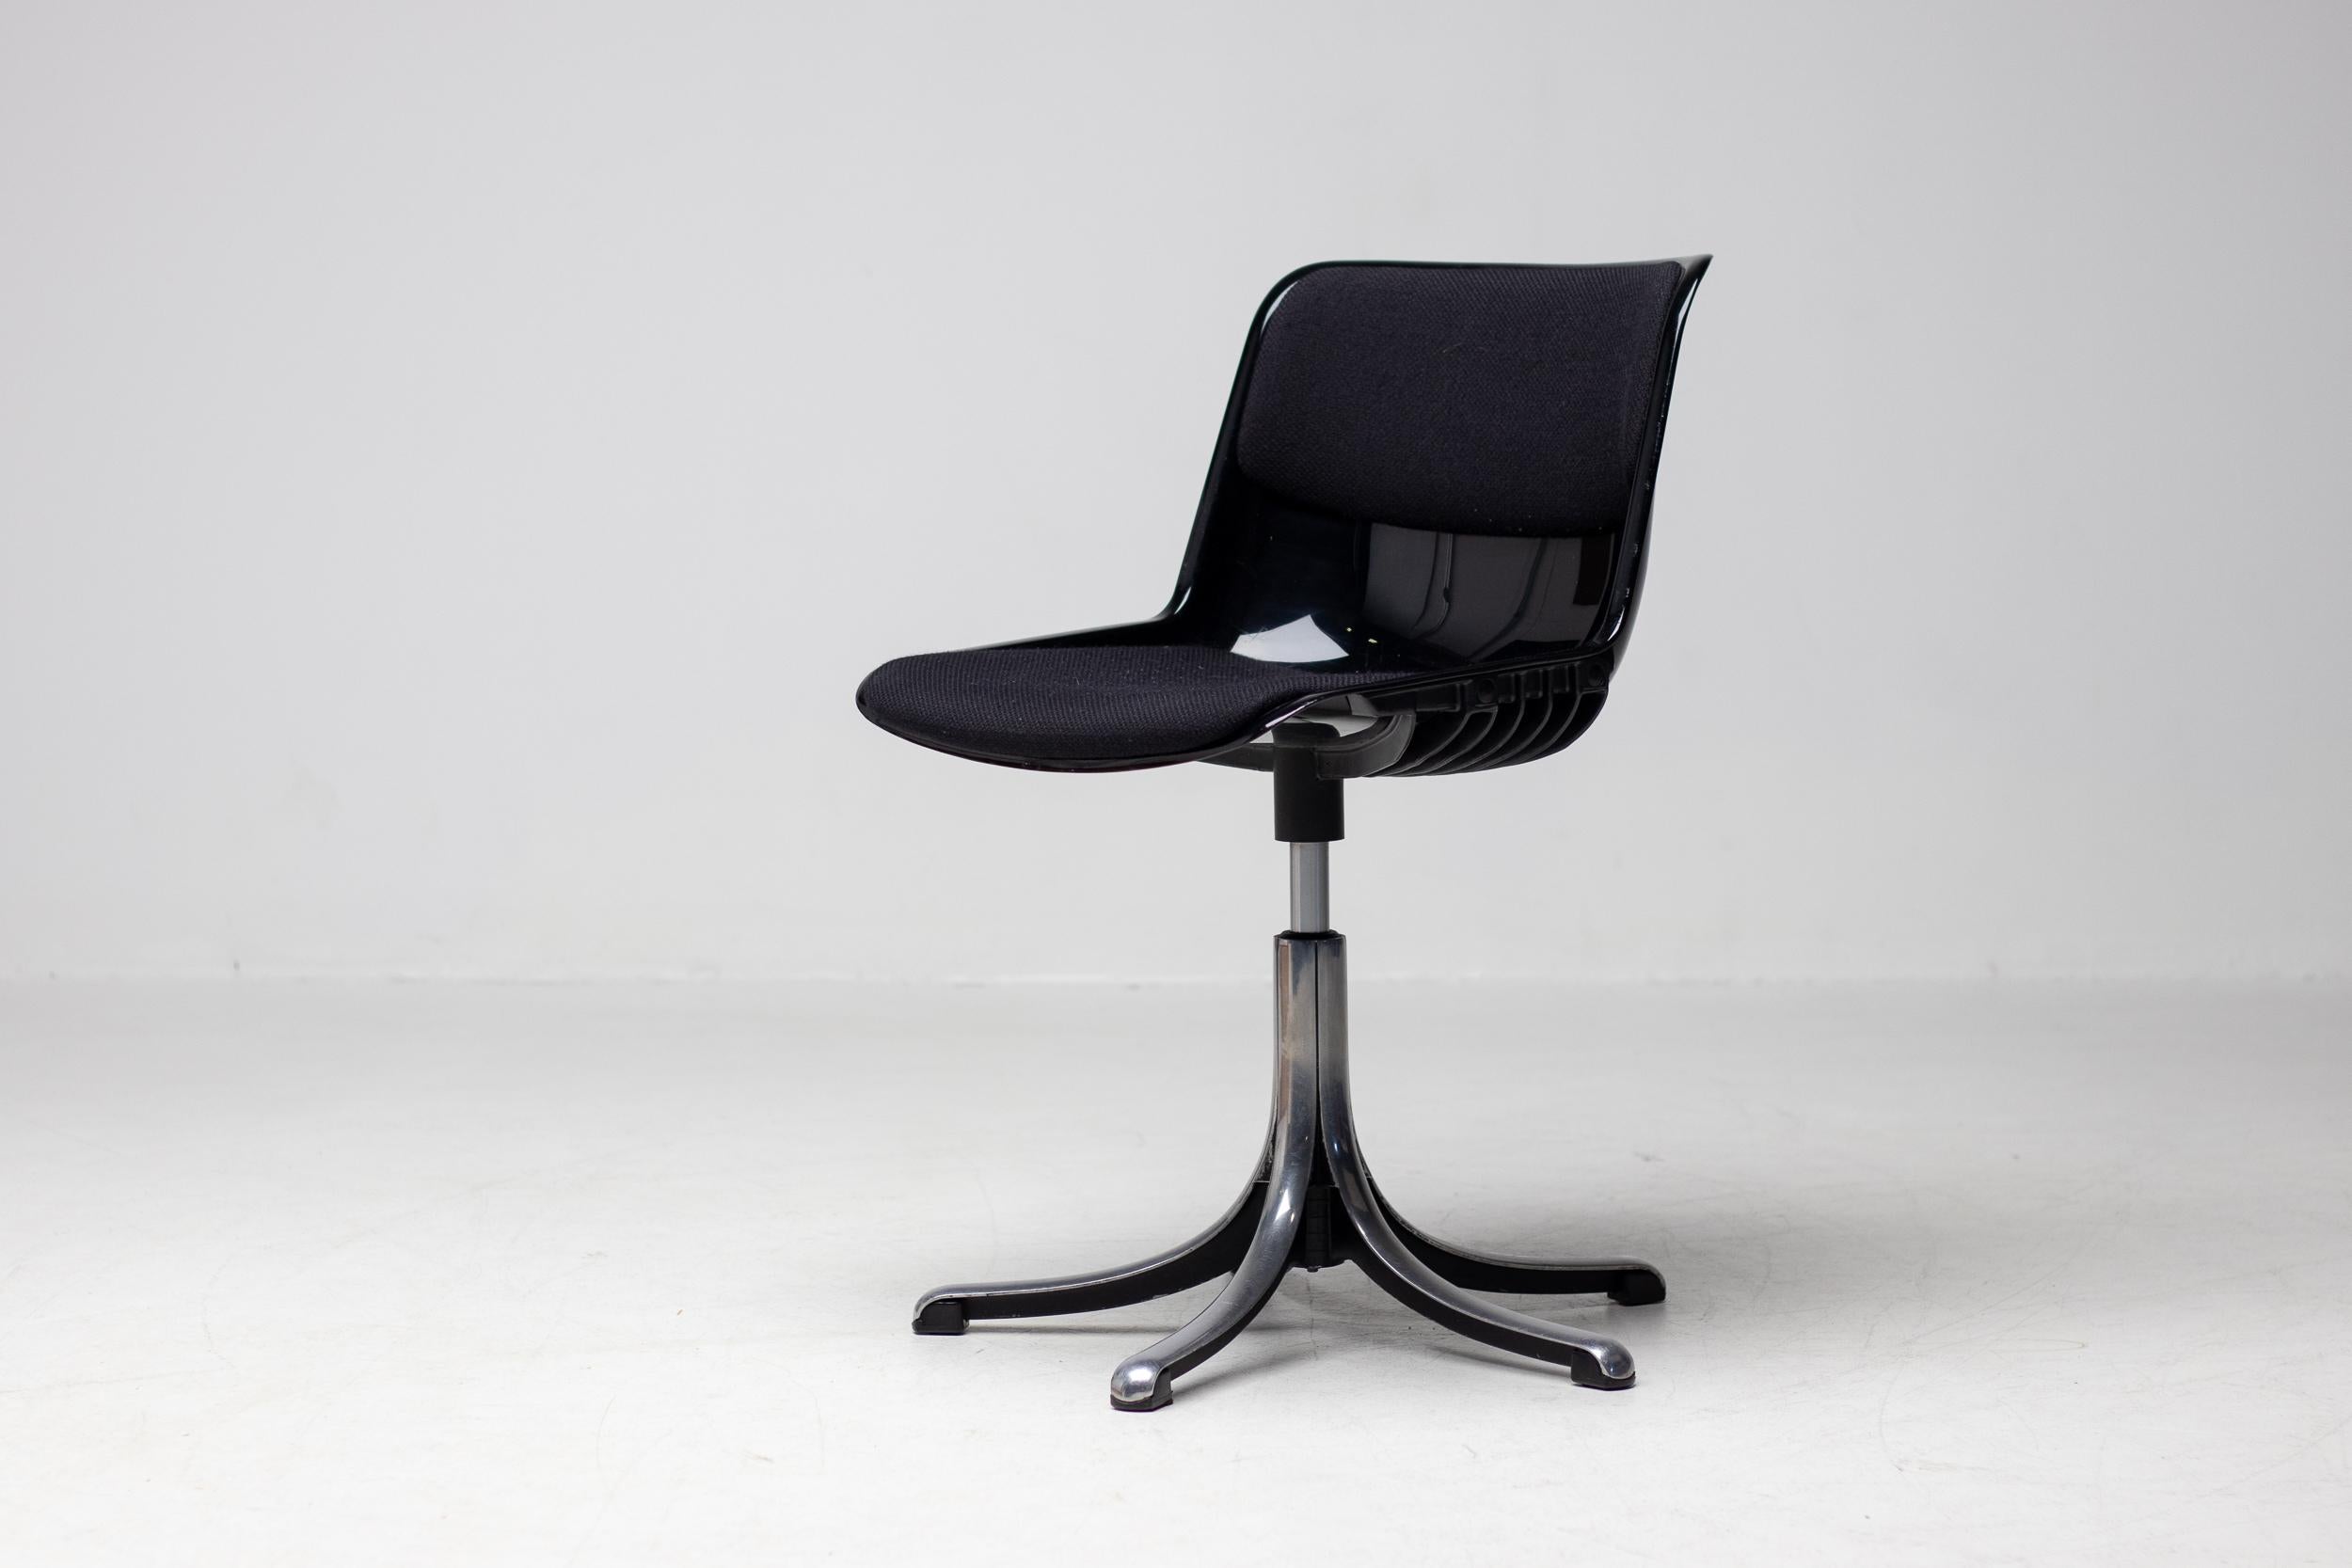 Set of 8 swiveling, height adjustable Modus chairs designed by Osvaldo Borsani for Tecno, Milan.
Thee chairs were used for many years in the conference room of the headquarters of Chanel in Amsterdam.
The equivalent of the 